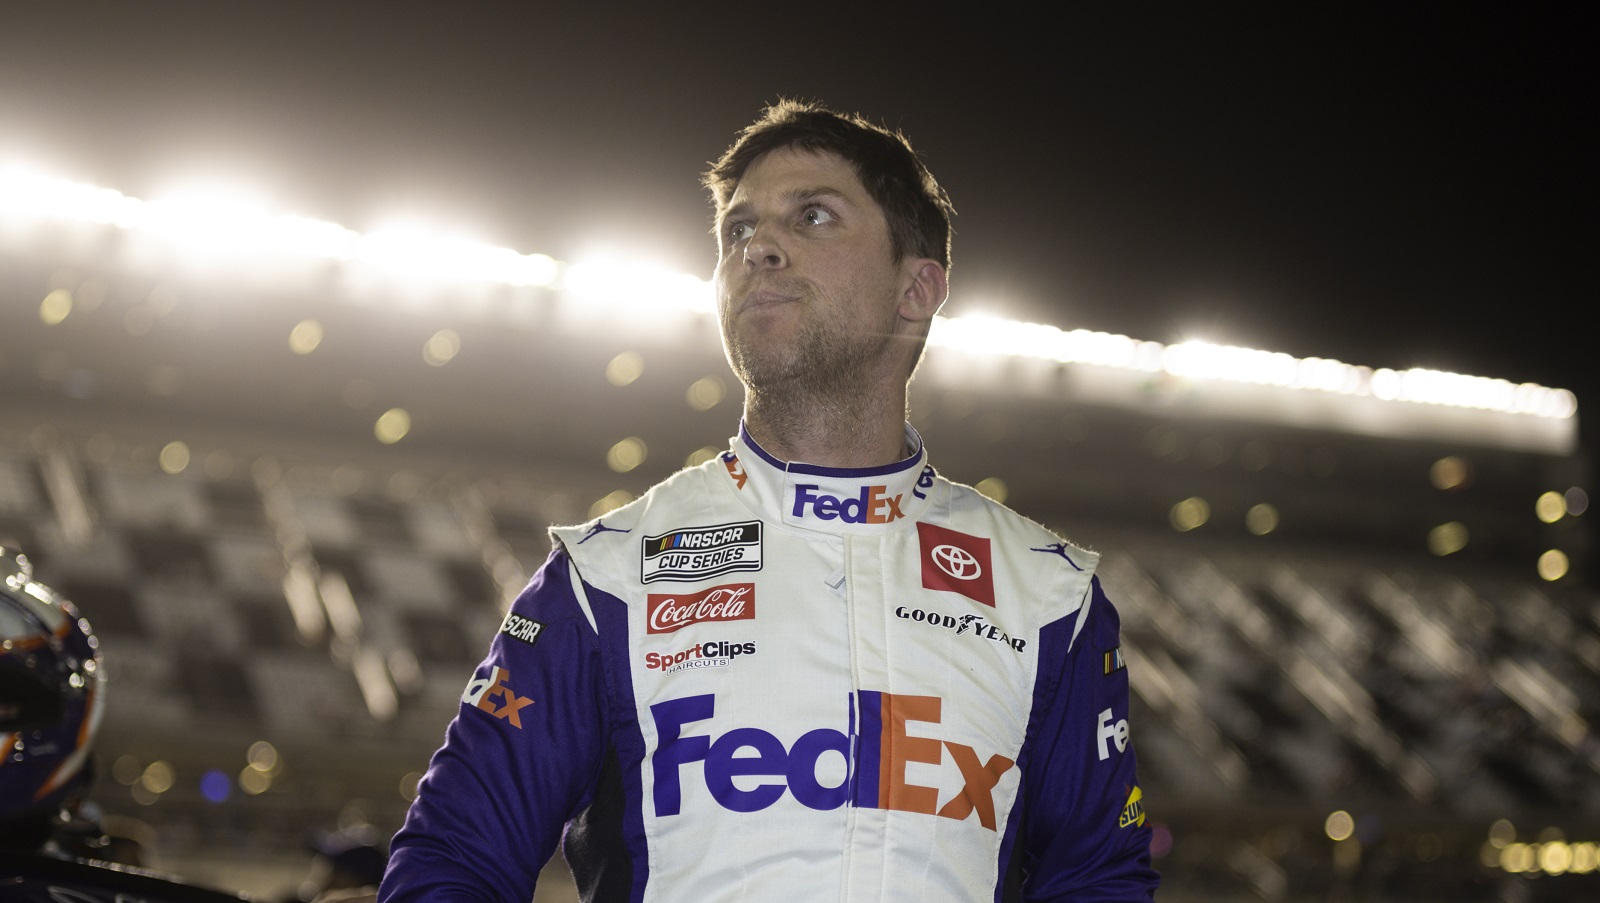 Denny Hamlin, driver of the No. 11 Toyota, waits on pit lane during qualifying for the NASCAR Cup Series Daytona 500 at Daytona International Speedway on Feb. 16, 2022. | James Gilbert/Getty Images